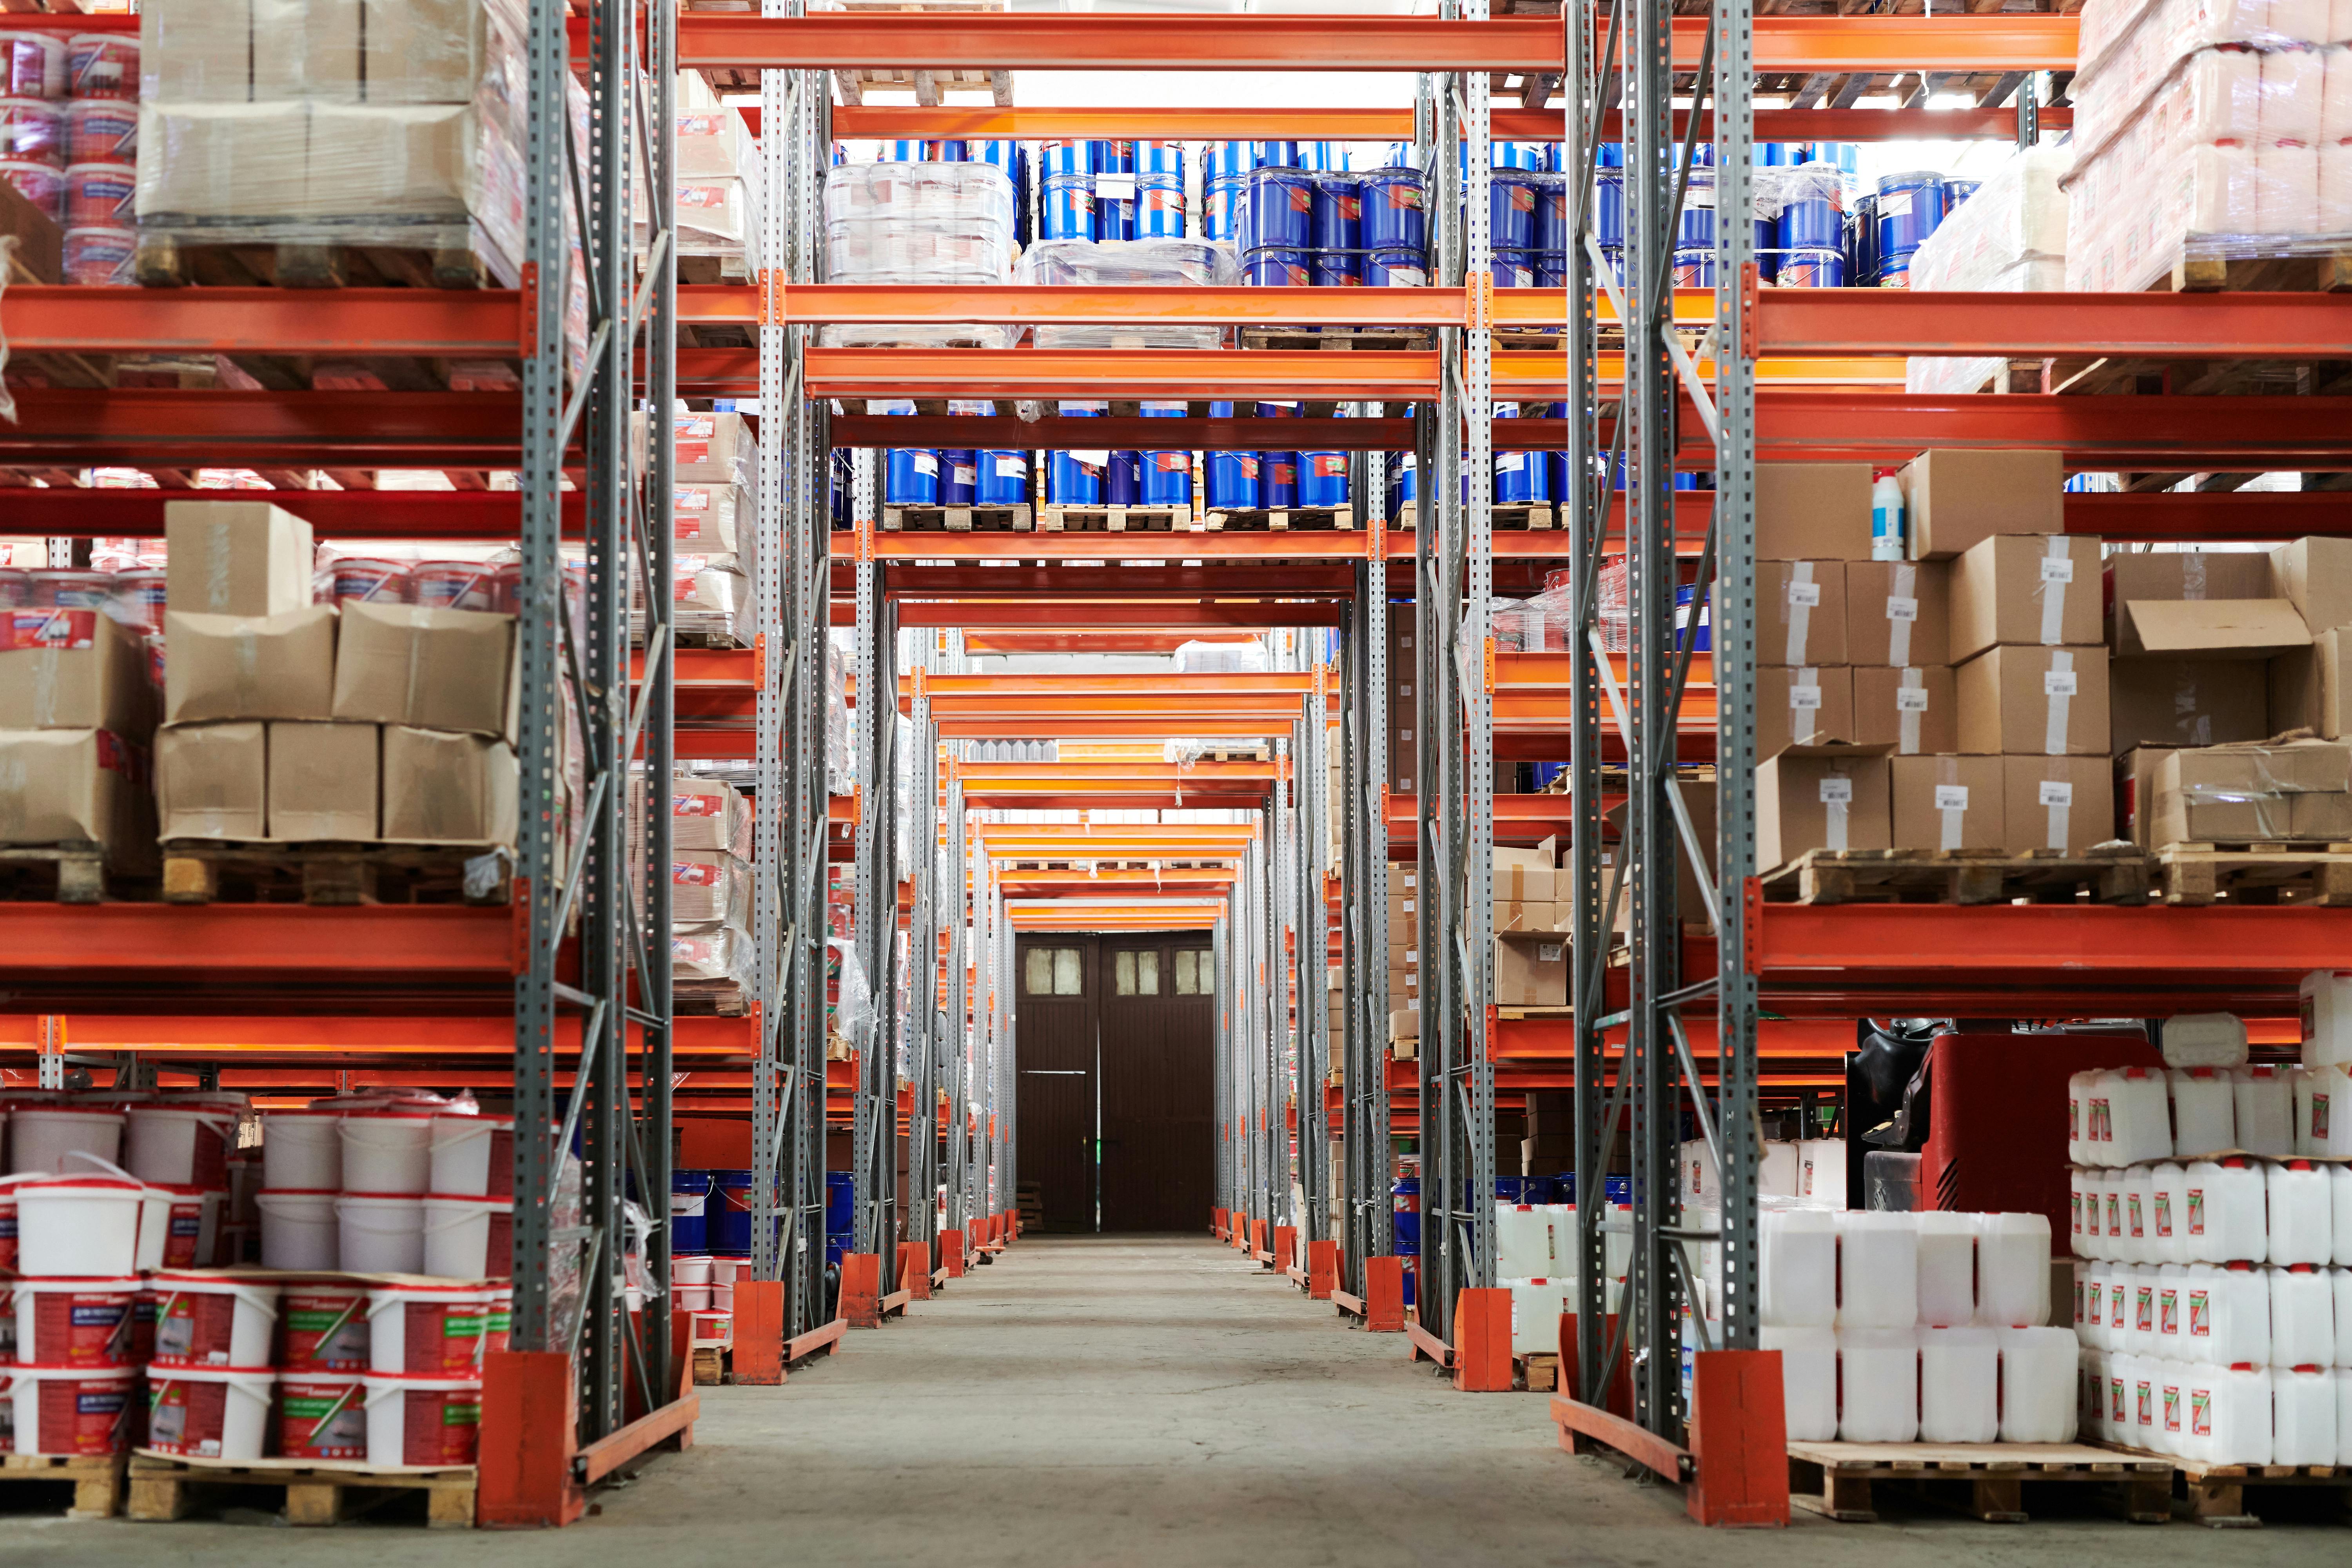 Warehouse woes driven by labor shortage, not capacity scarcity: economist |  Journal of Commerce